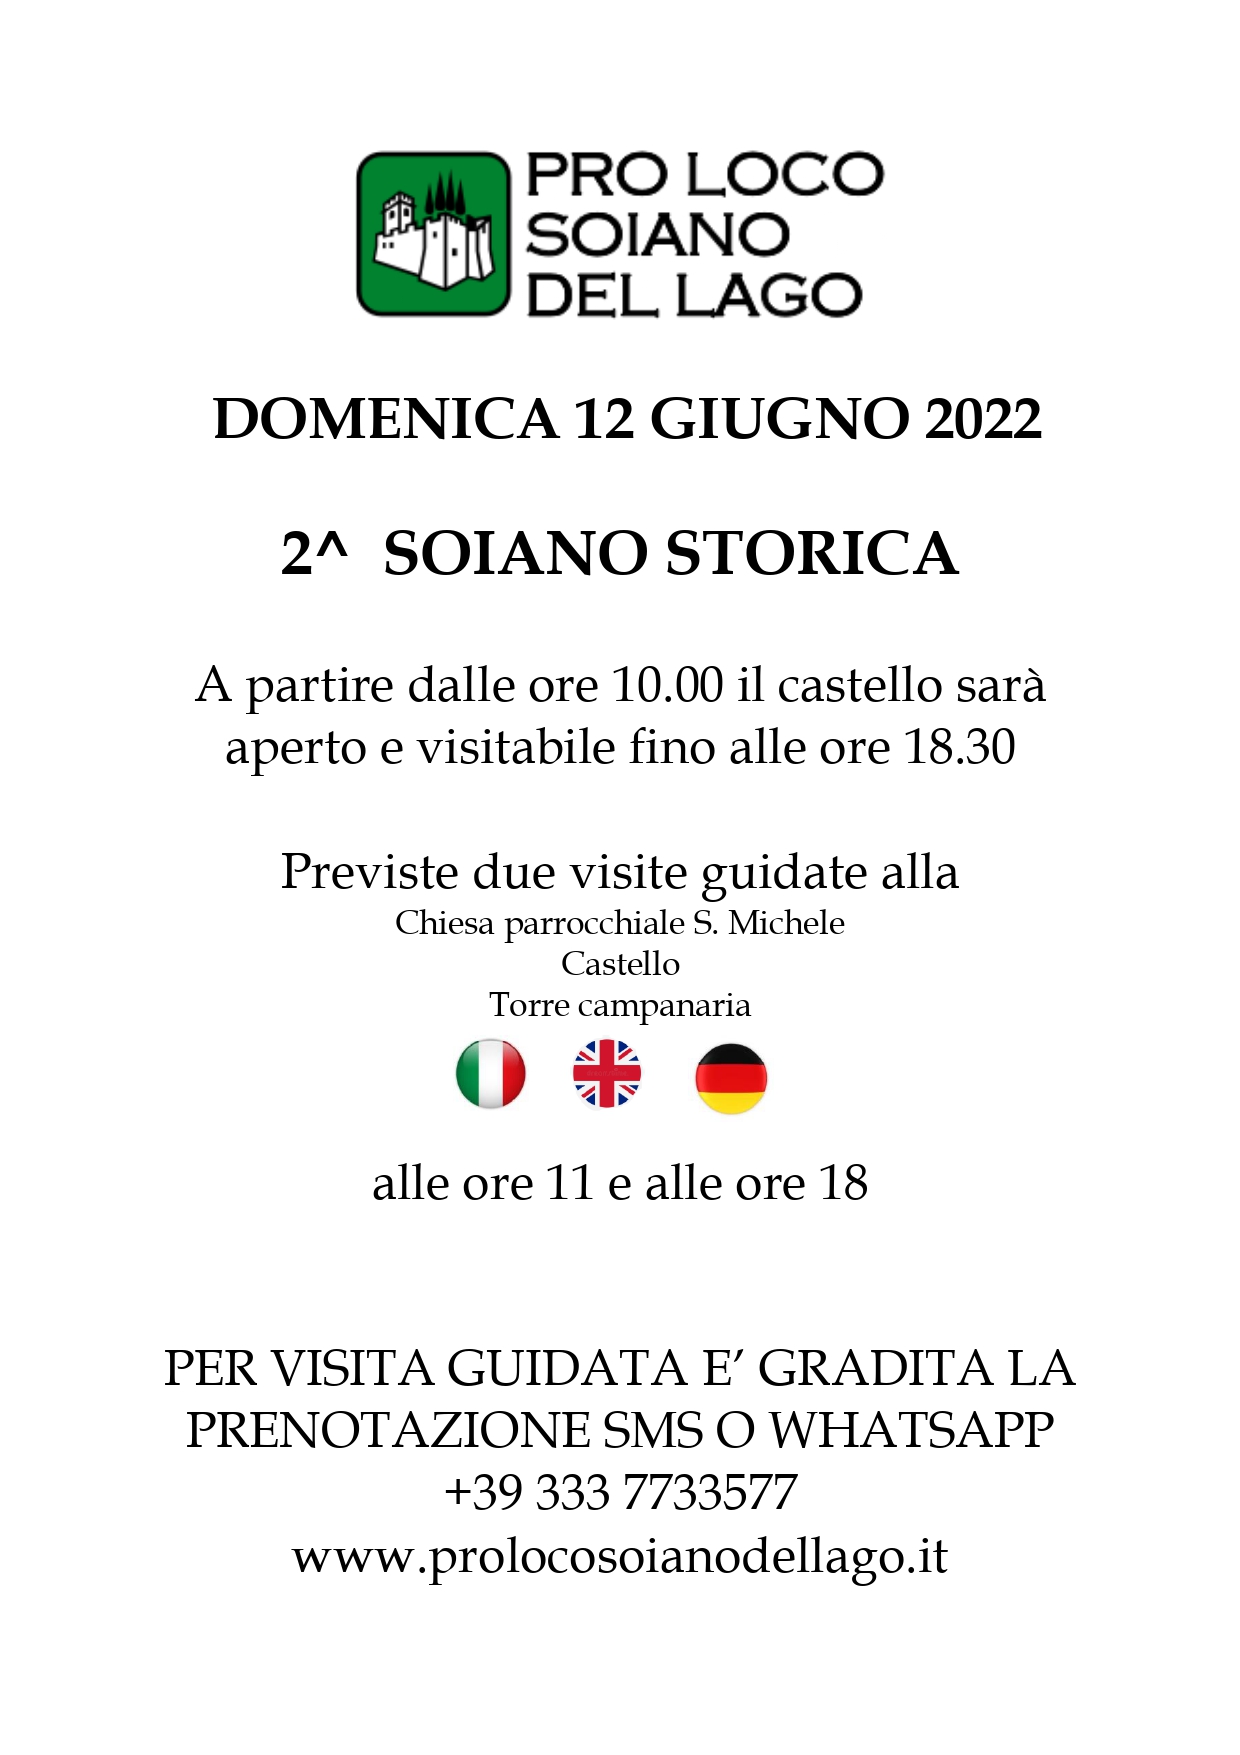 2_soiano_storica_ITA_ENG_page-0001